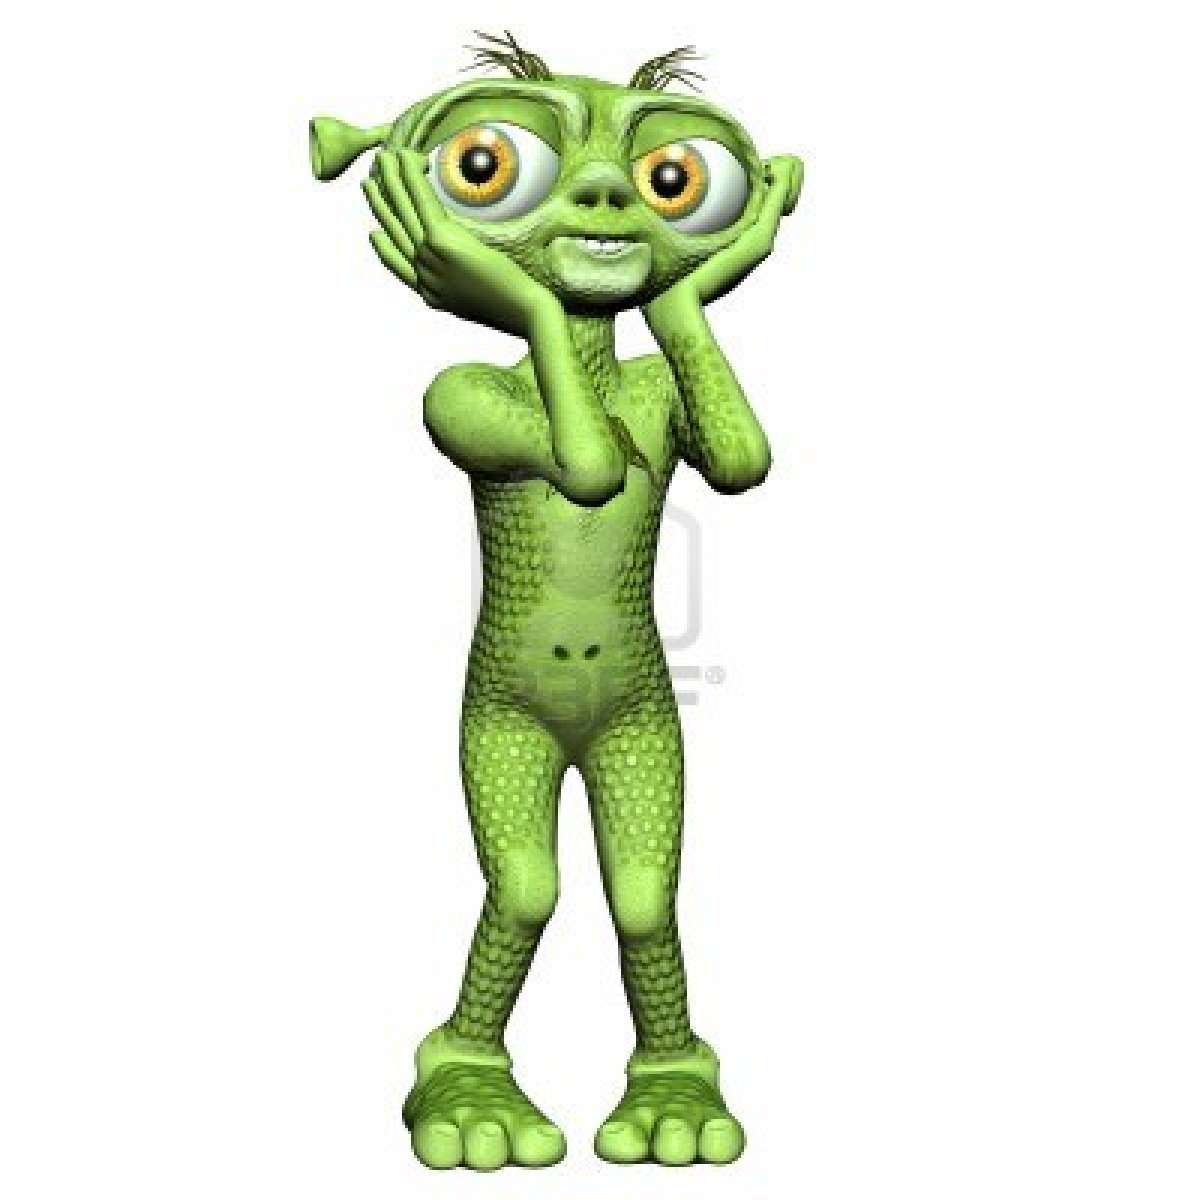 12331972-illustration-of-a-green-alien-isolated-on-a-white-background